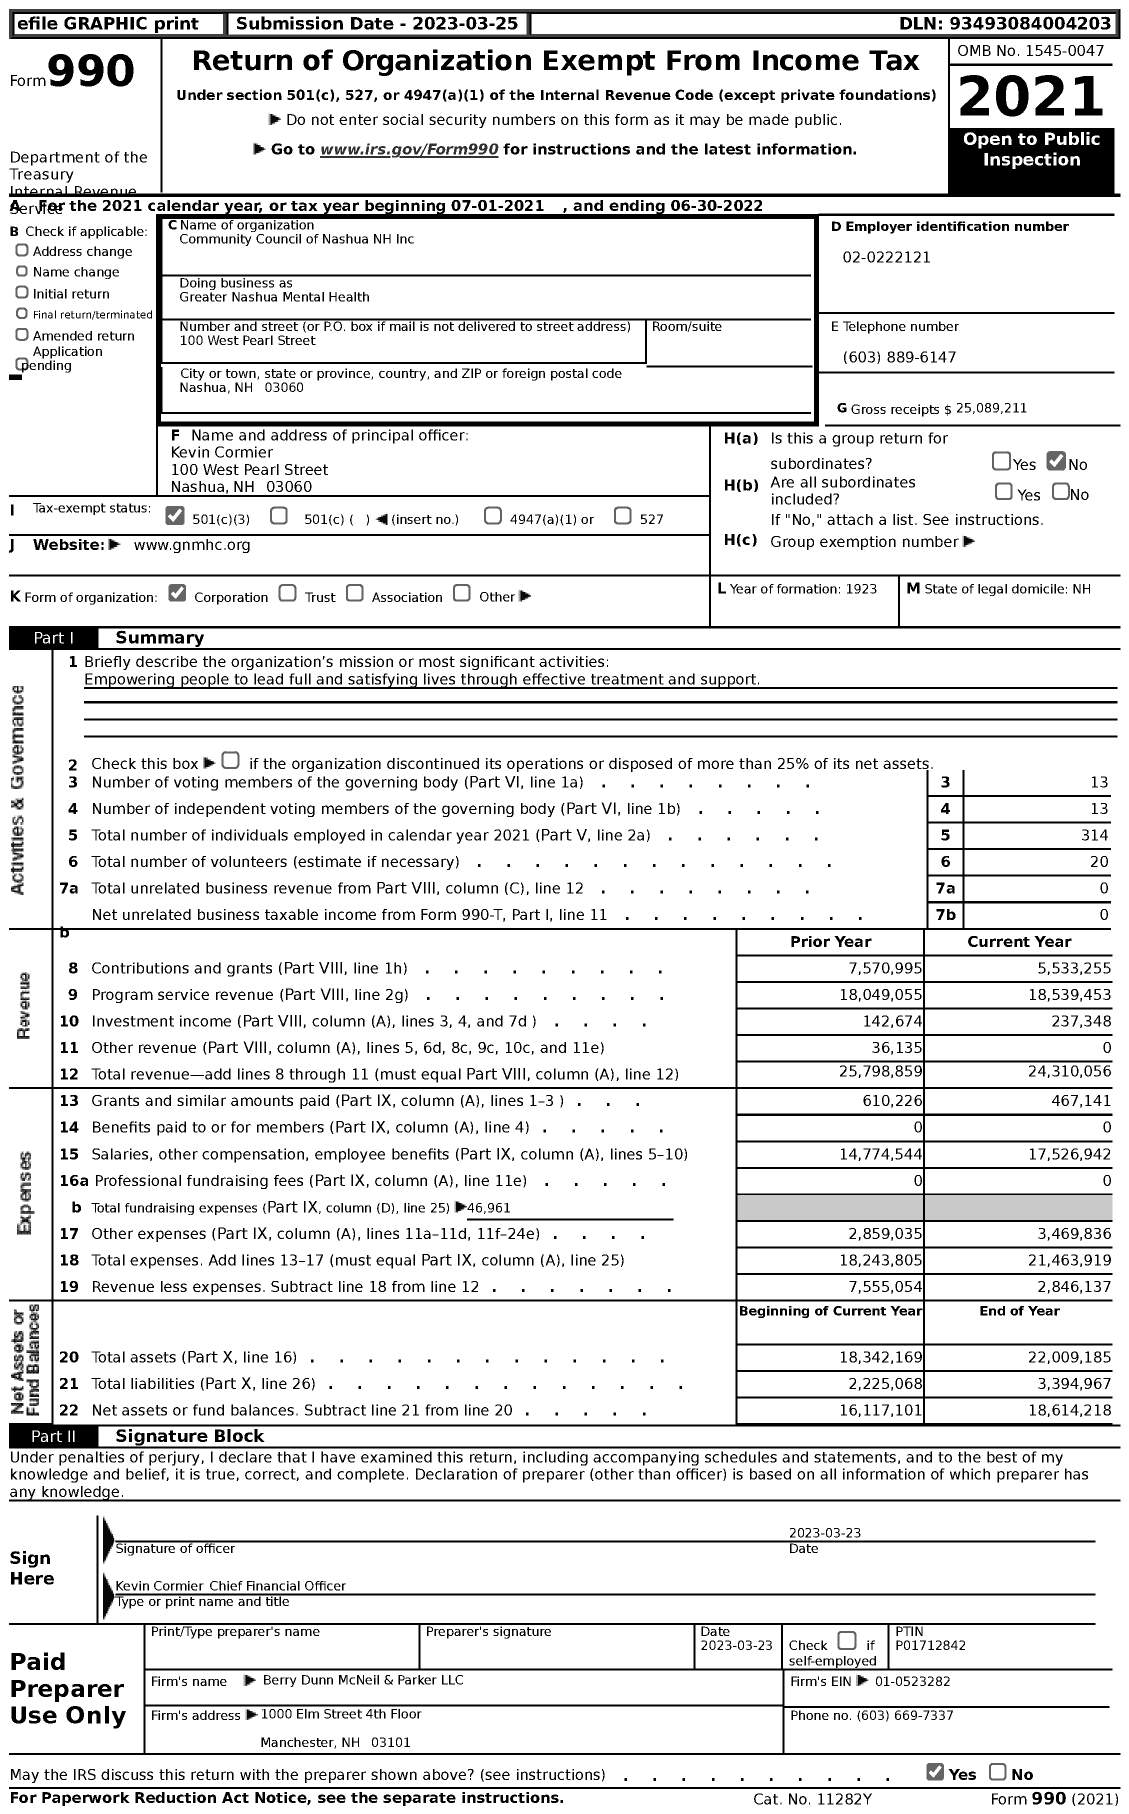 Image of first page of 2021 Form 990 for Greater Nashua Mental Health (GNMHC)